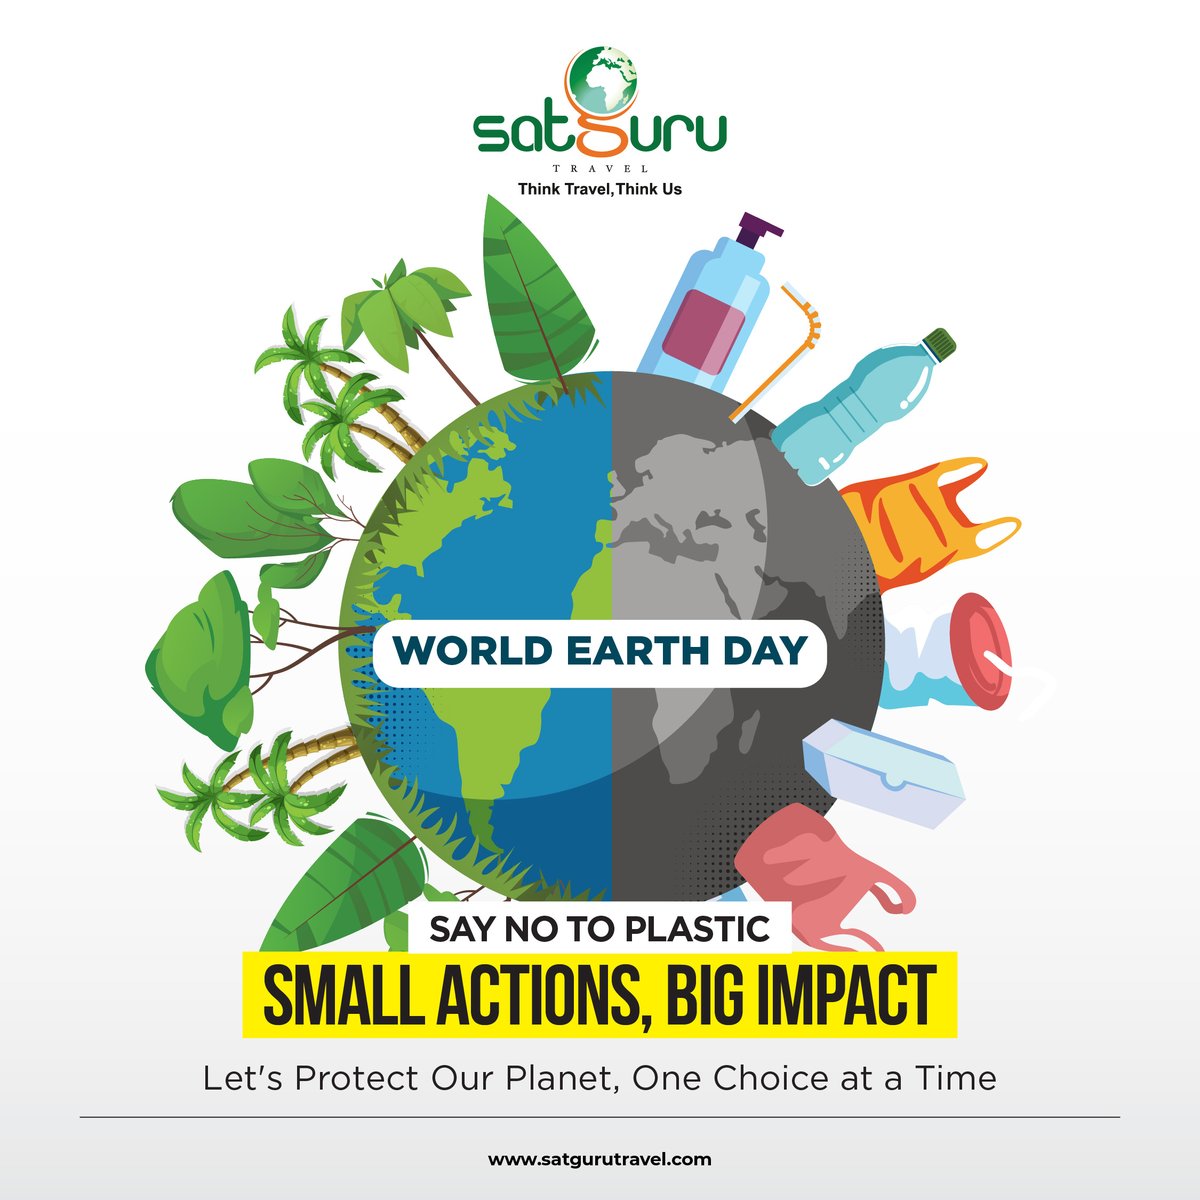 Happy World Earth Day! Let's join hands to nurture Mother Earth and create a sustainable future for generations to come. . . . . #EarthDay #WorldEarthDay #Planet #Plastics #PlanetvsPlastics #satgurutravel